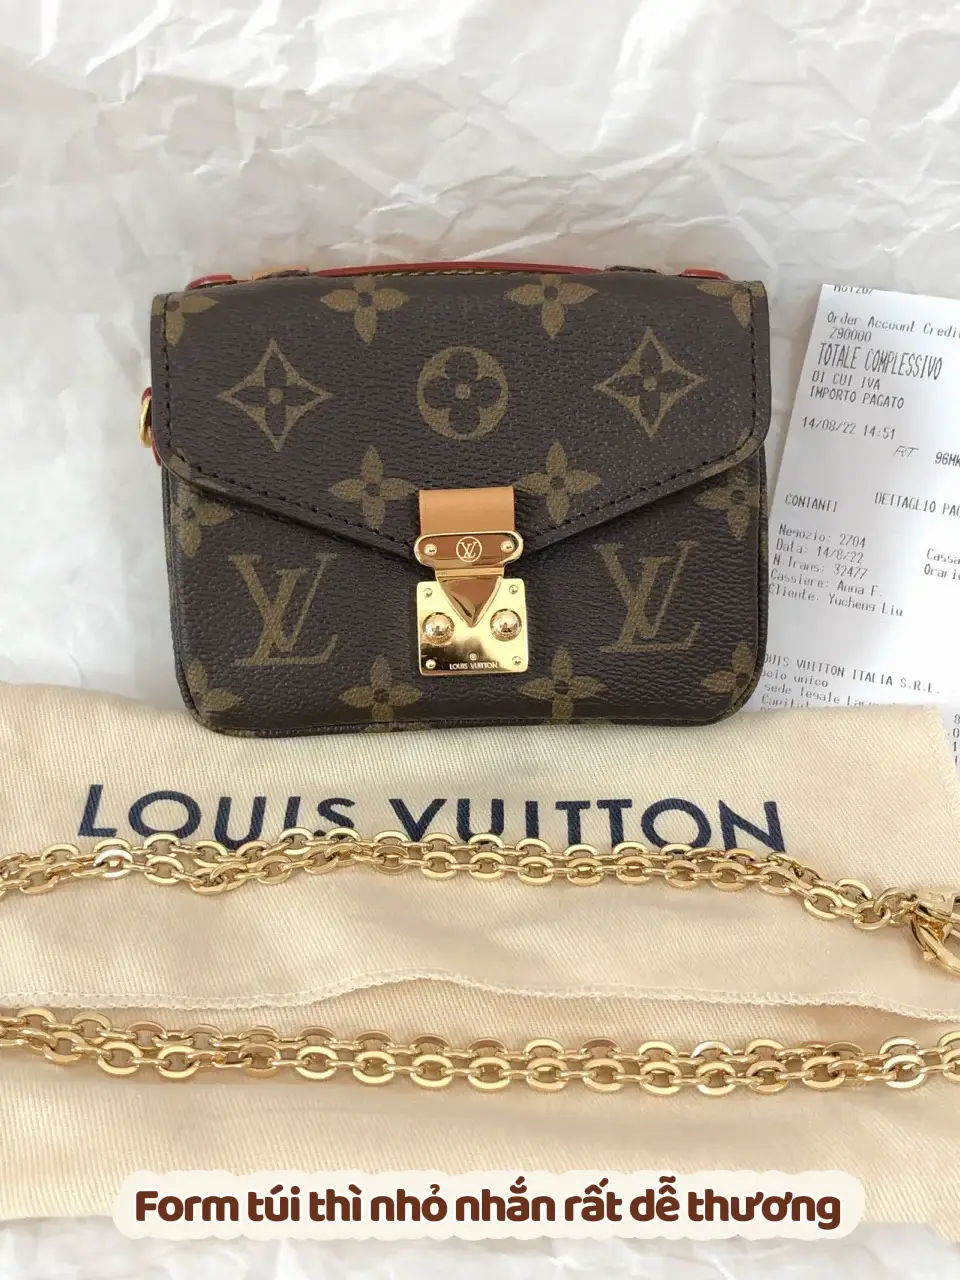 LOUIS VUITTON MICRO METIS, FIRST IMPRESSION, WHAT FITS